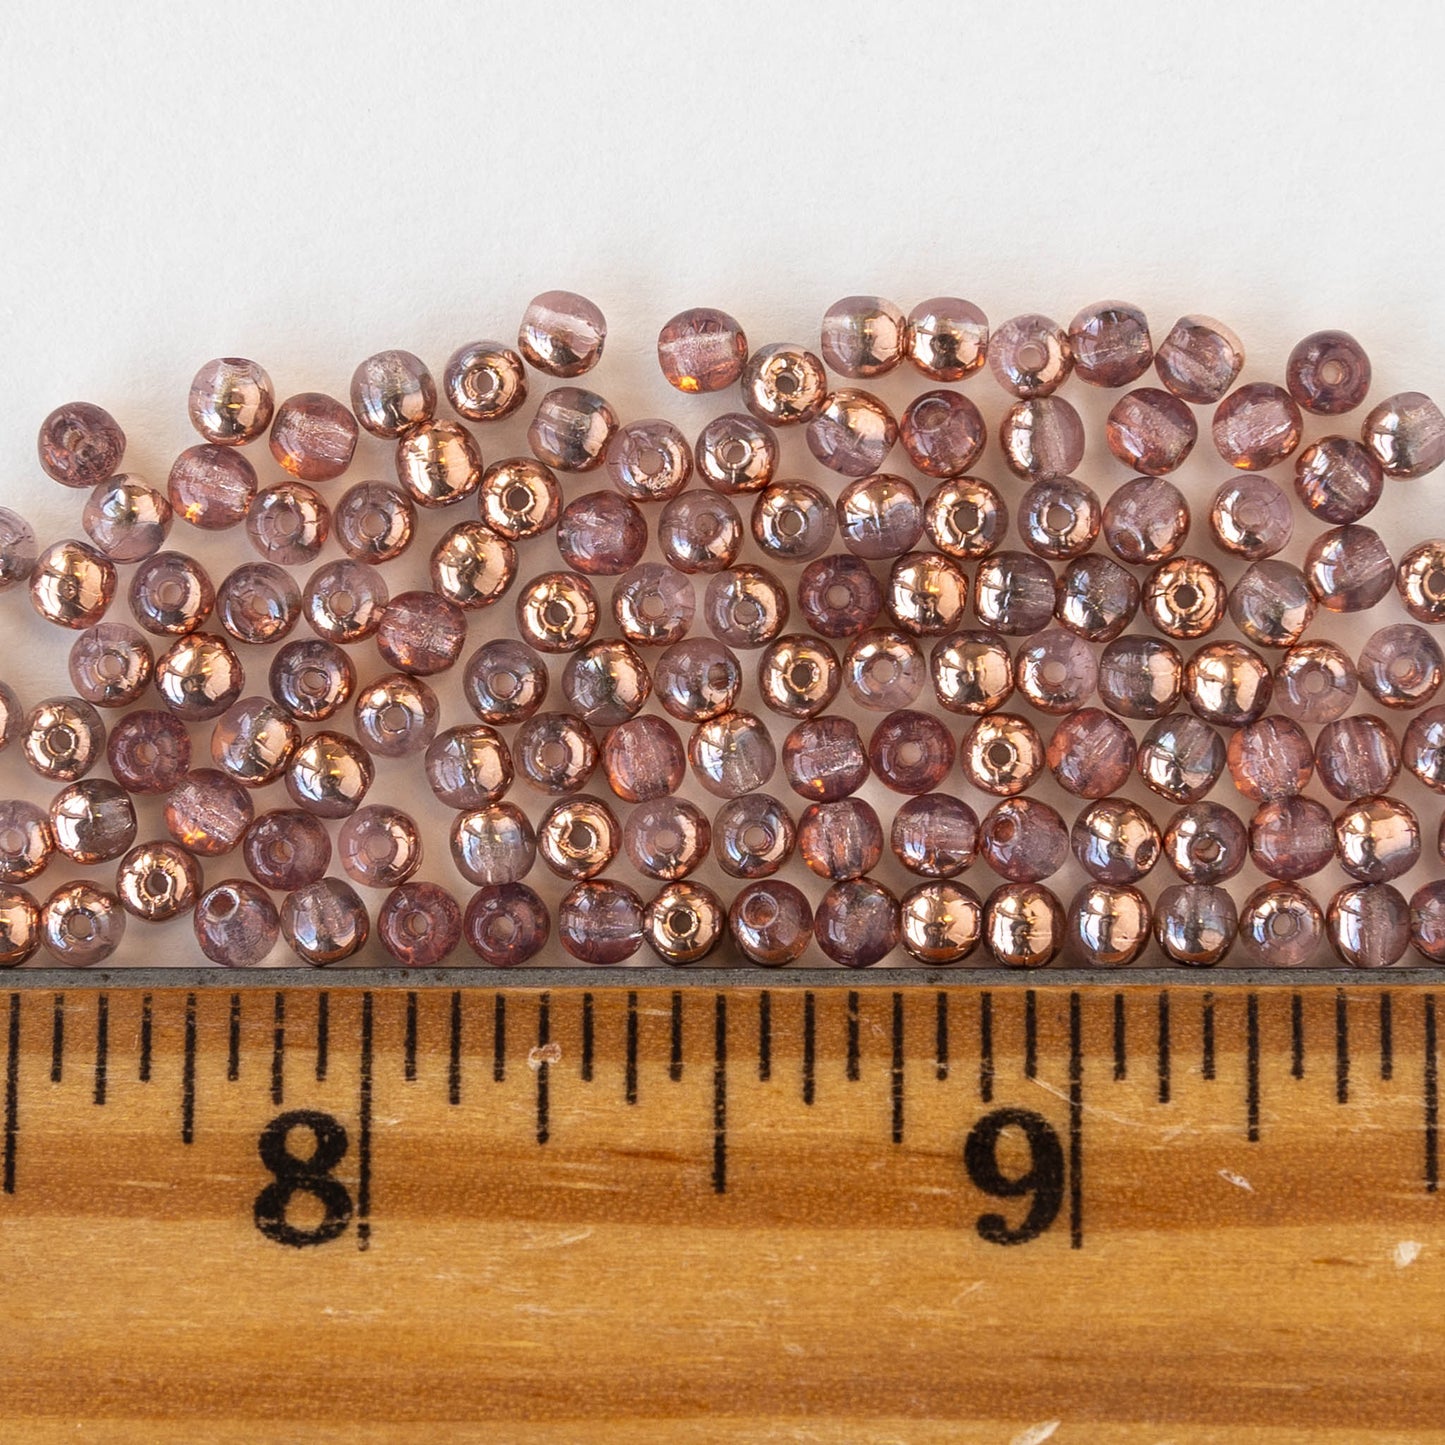 3mm Round Glass Beads - Amethyst Copper - 120 Beads